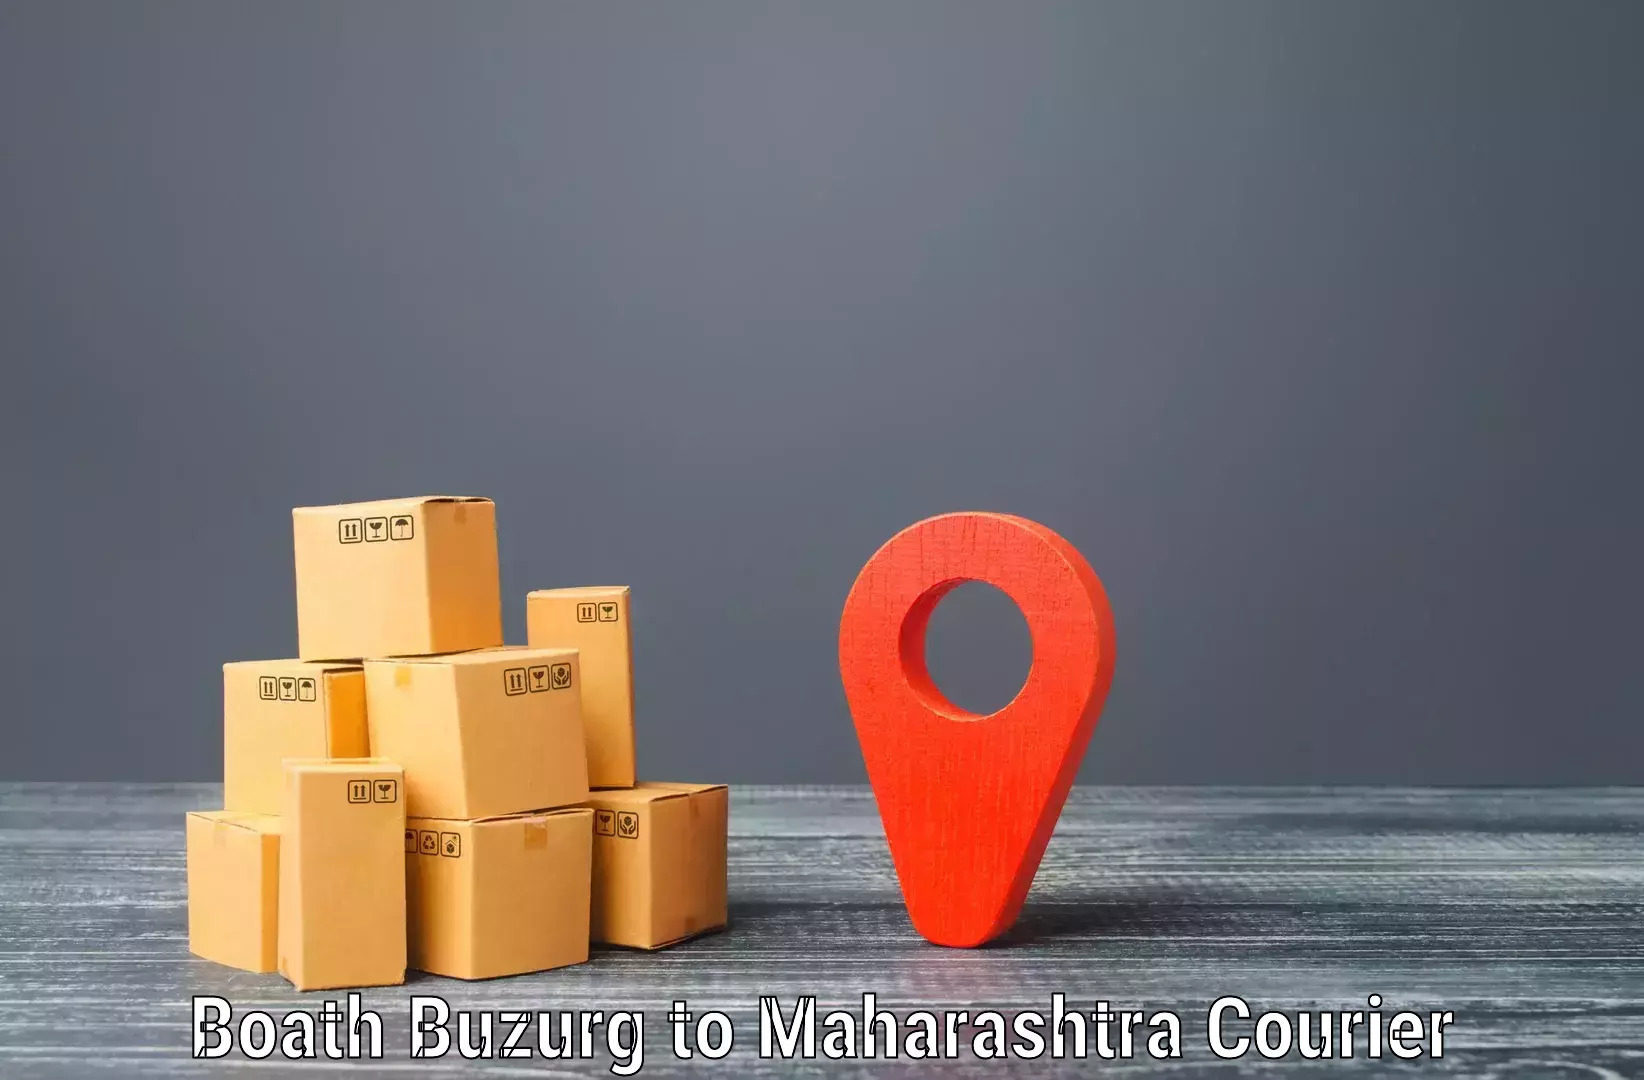 Express delivery network Boath Buzurg to Paithan